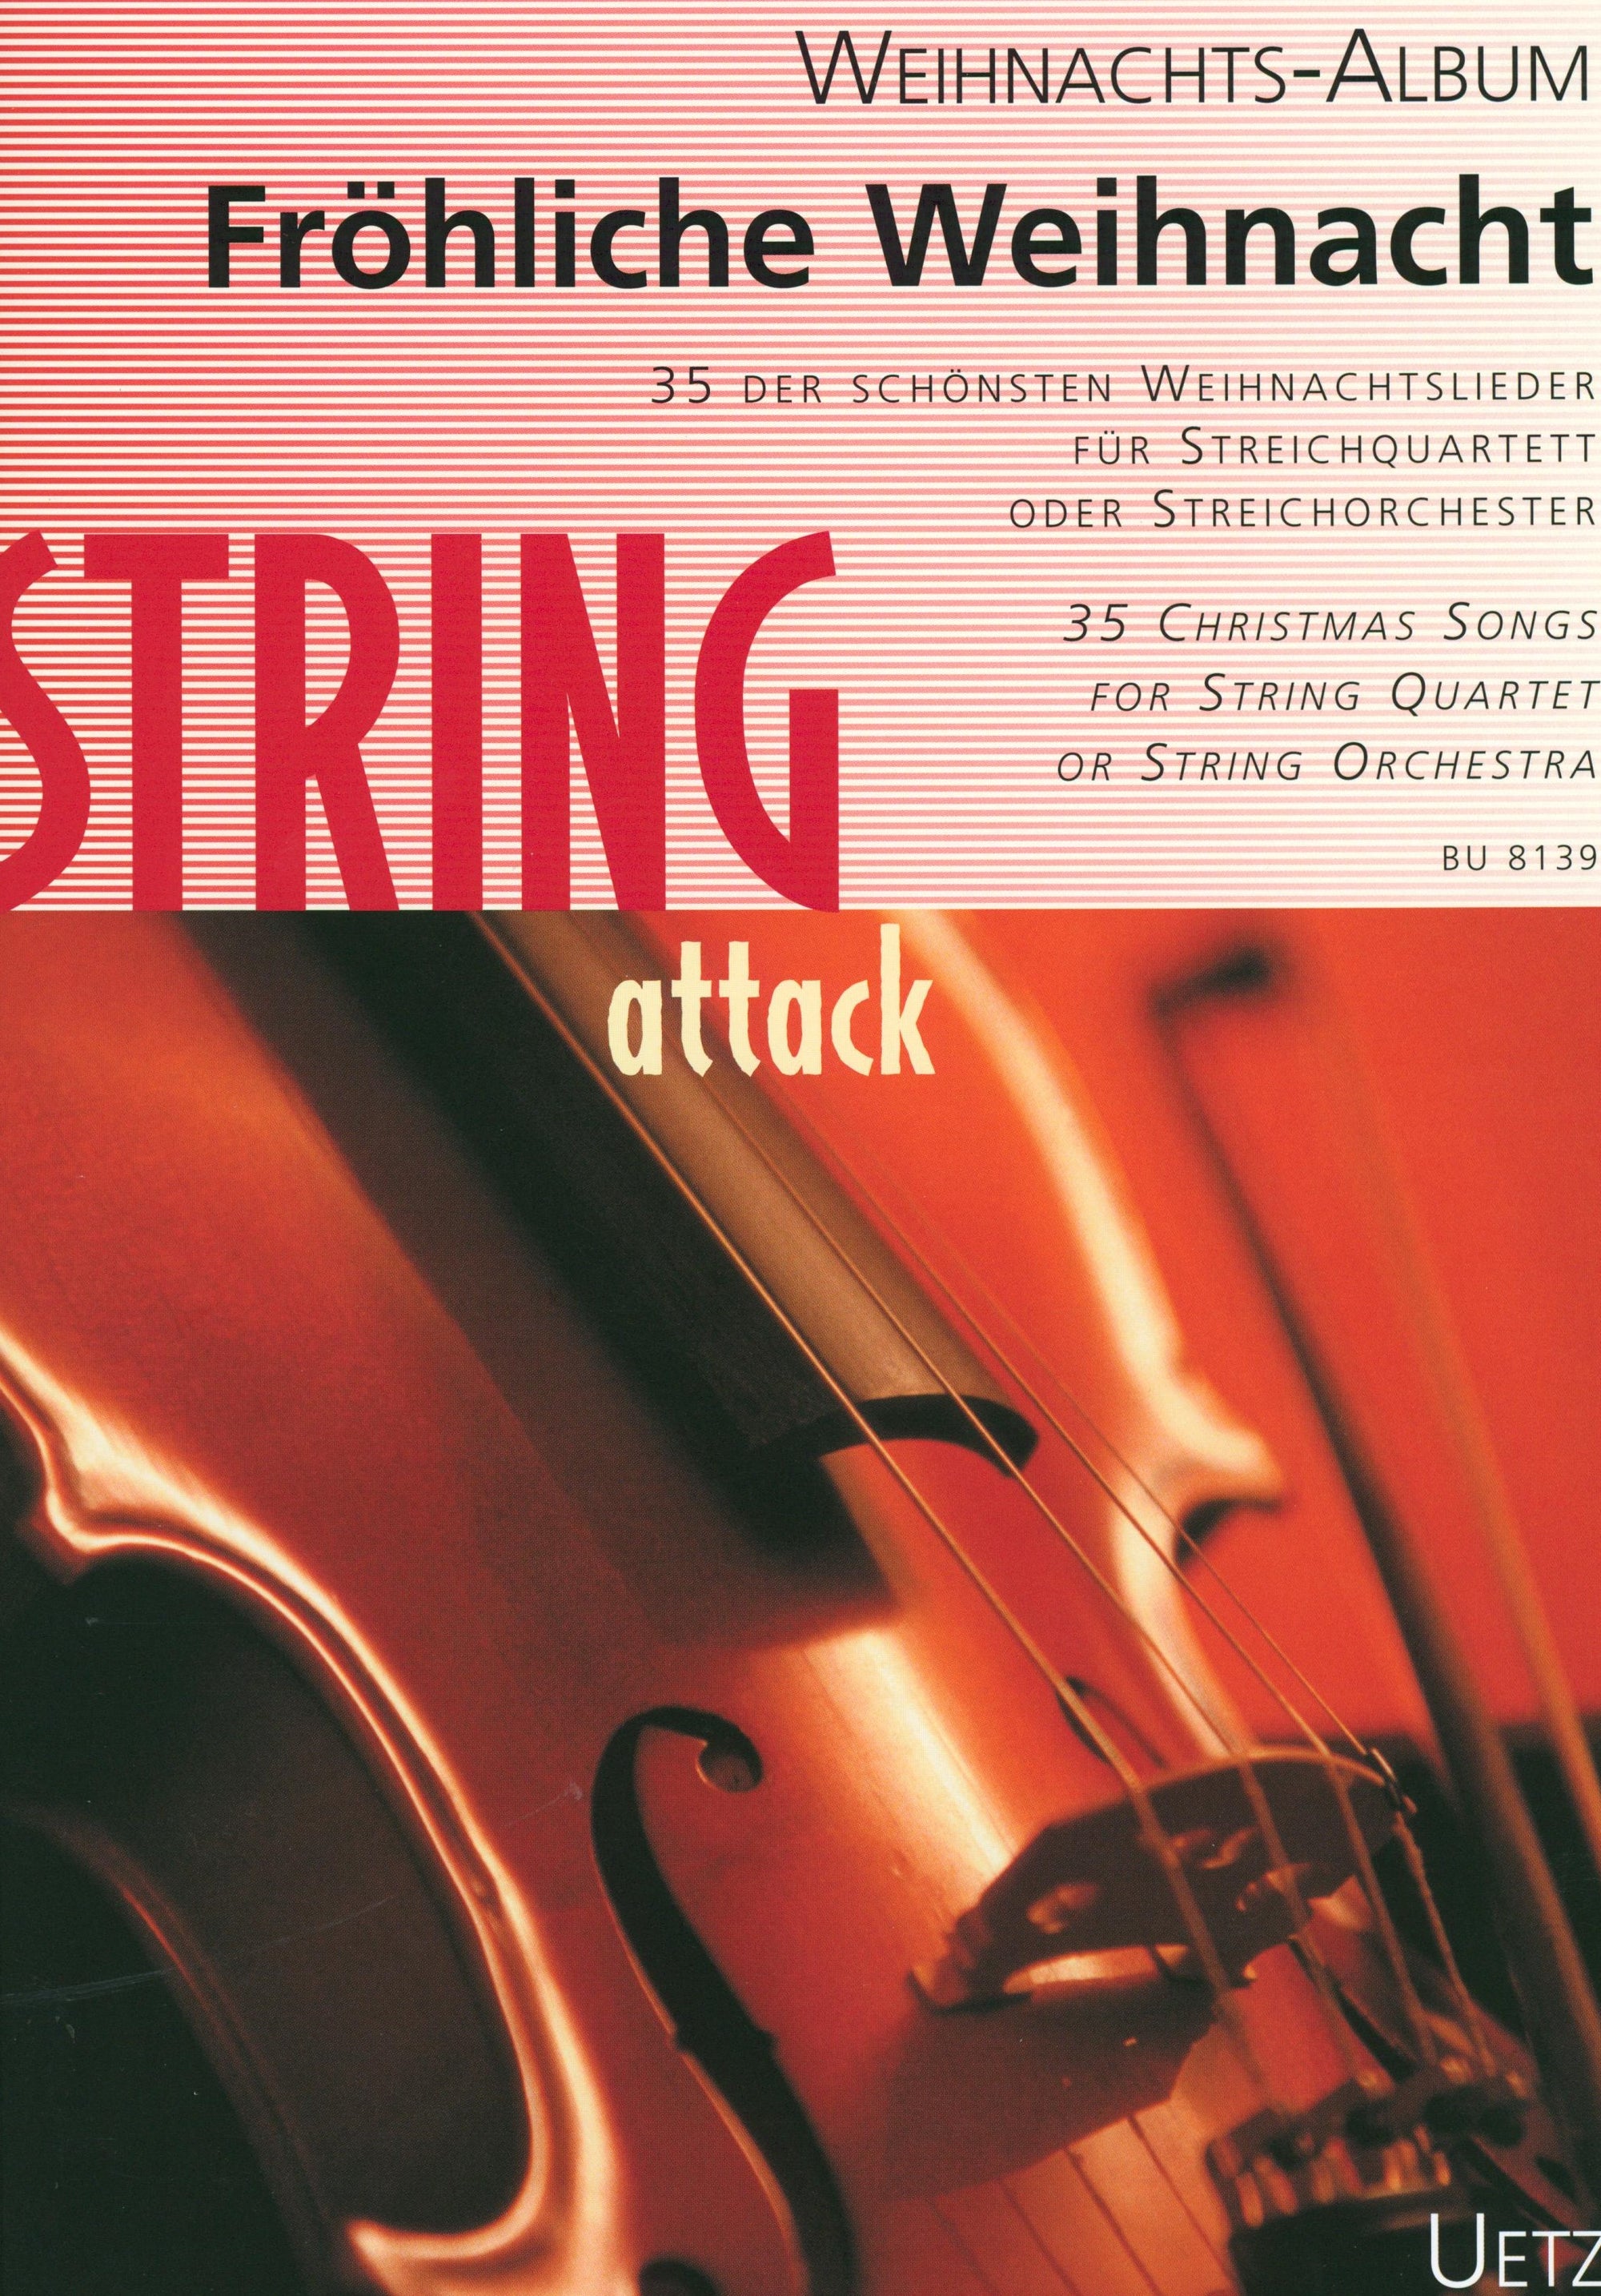 Merry Christmas for String Quartet or String Orchestra